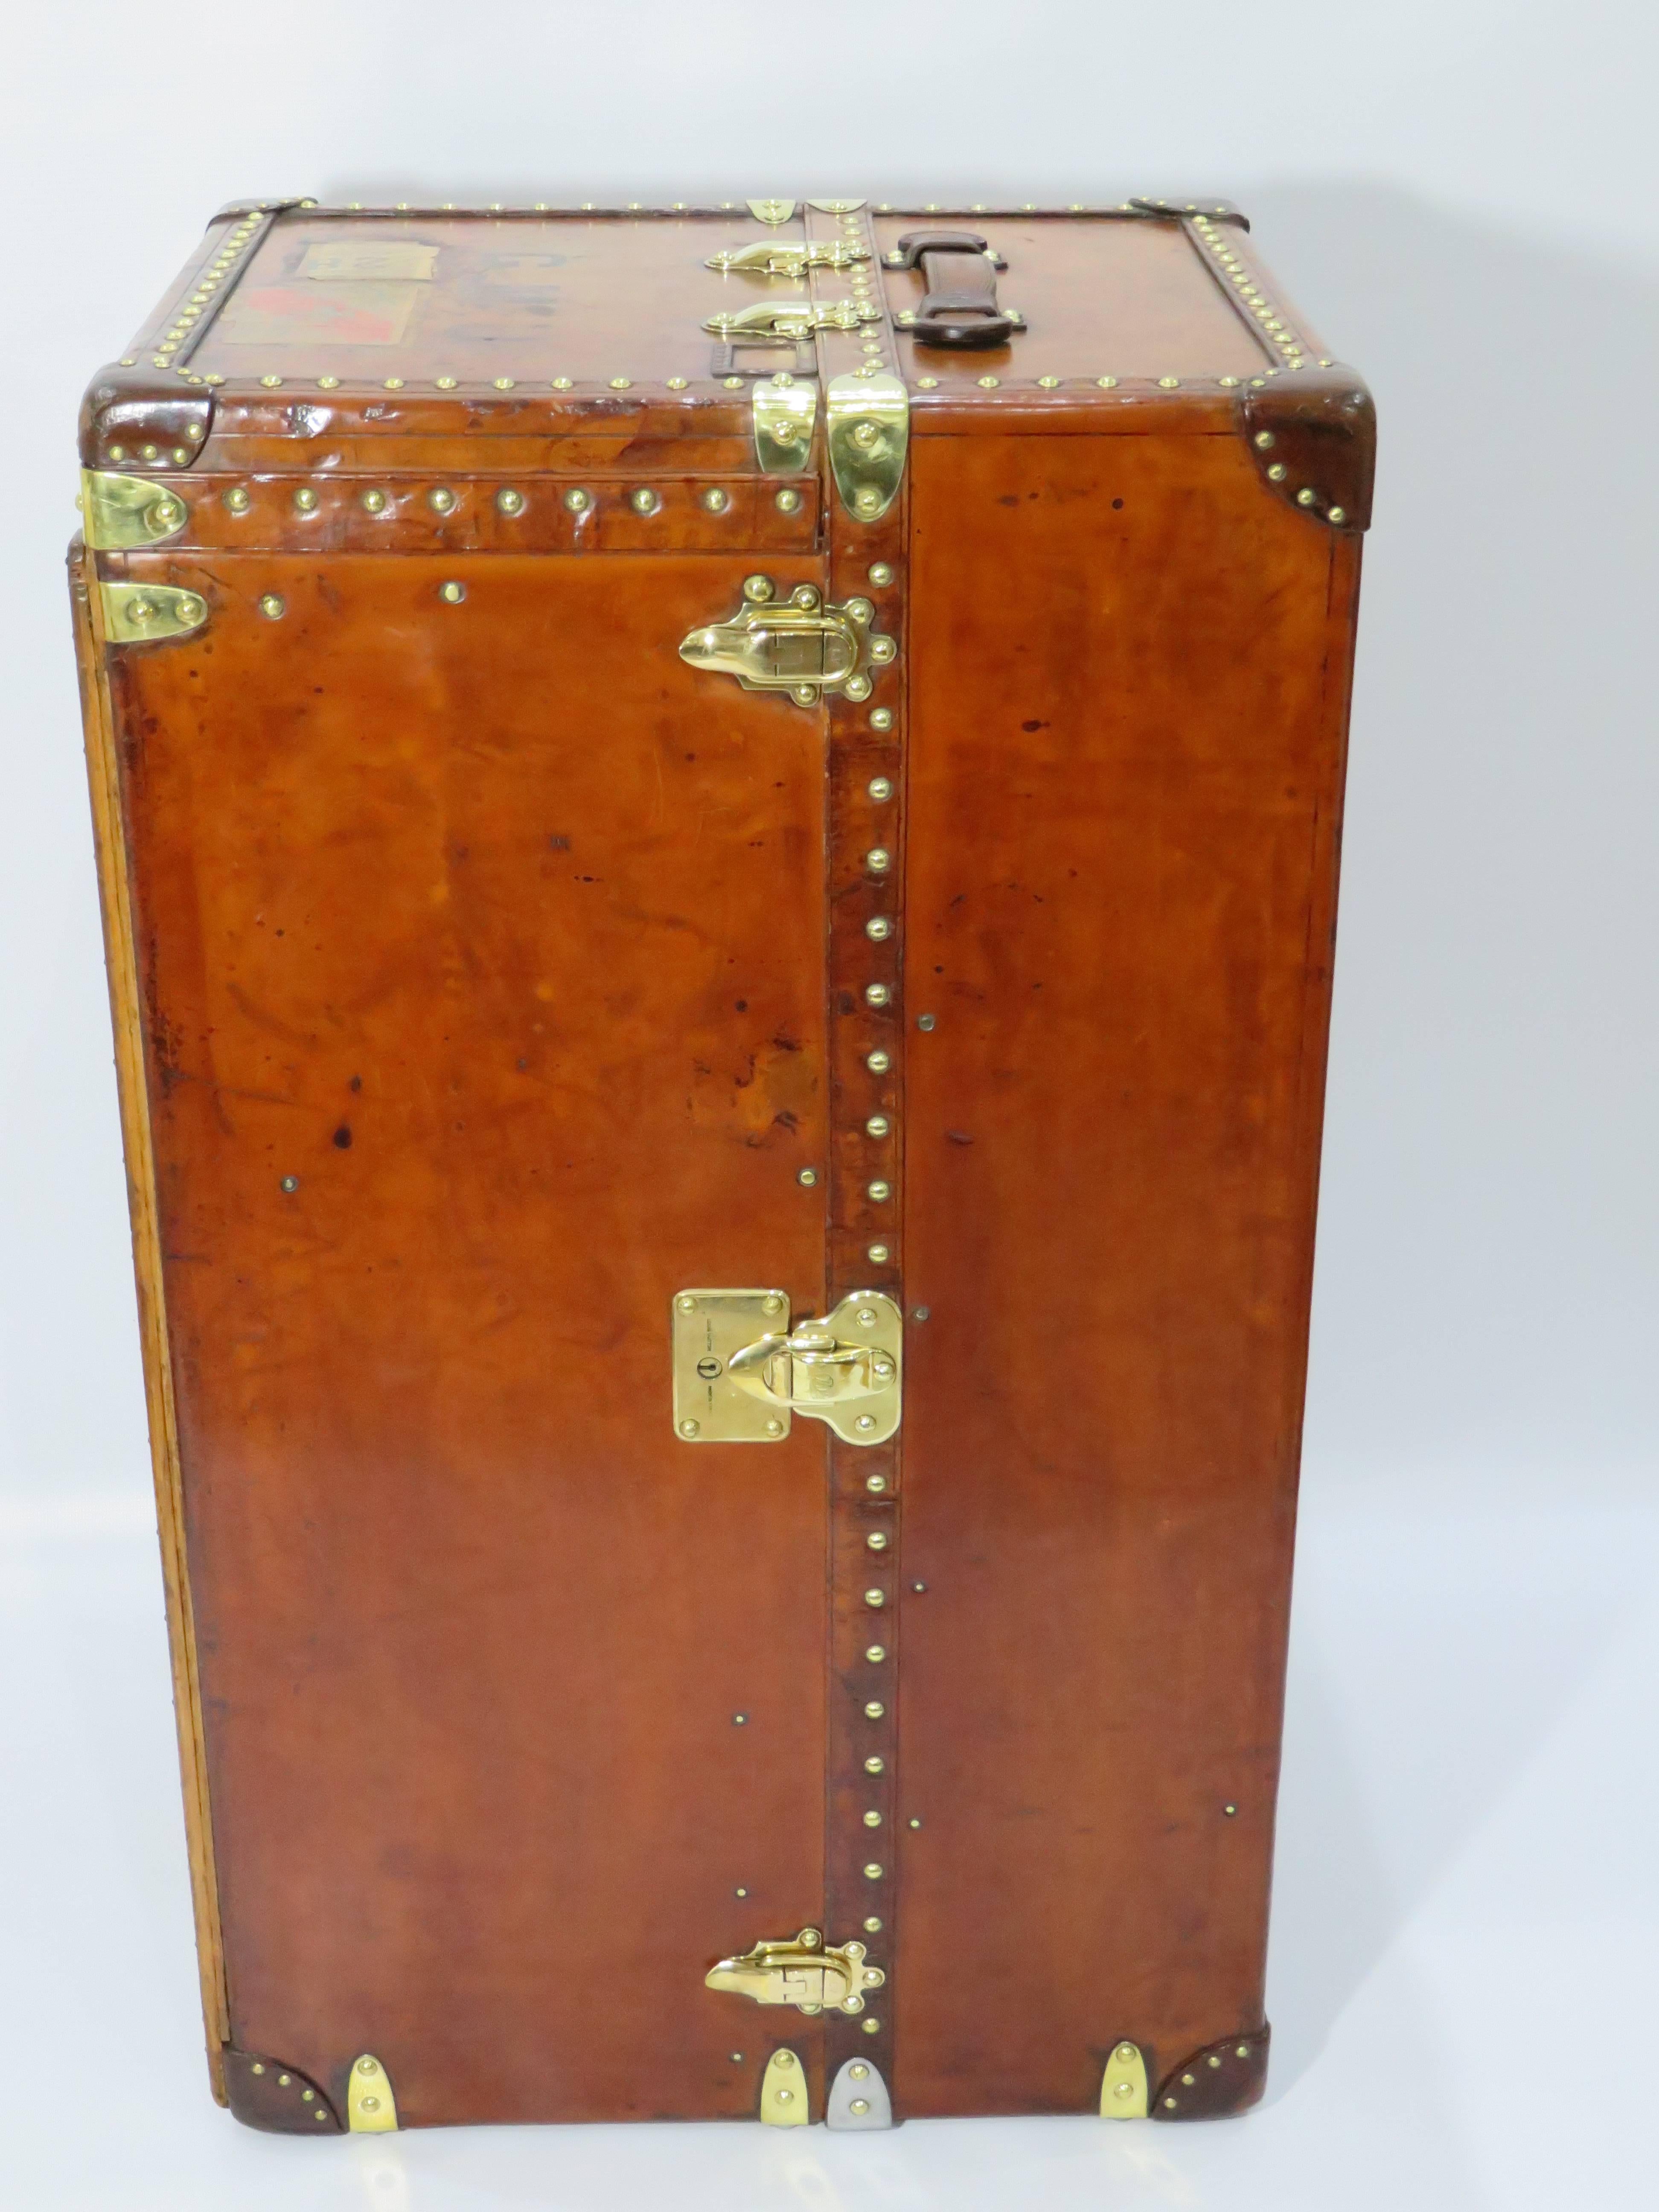 For sale a collector's item, a complete early 20th century Louis Vuitton leather wardrobe, with a 100% complete interior, finished in cowhide leather with brass details. 

This is the biggest size wardrobe LV ever made and not to be compared with